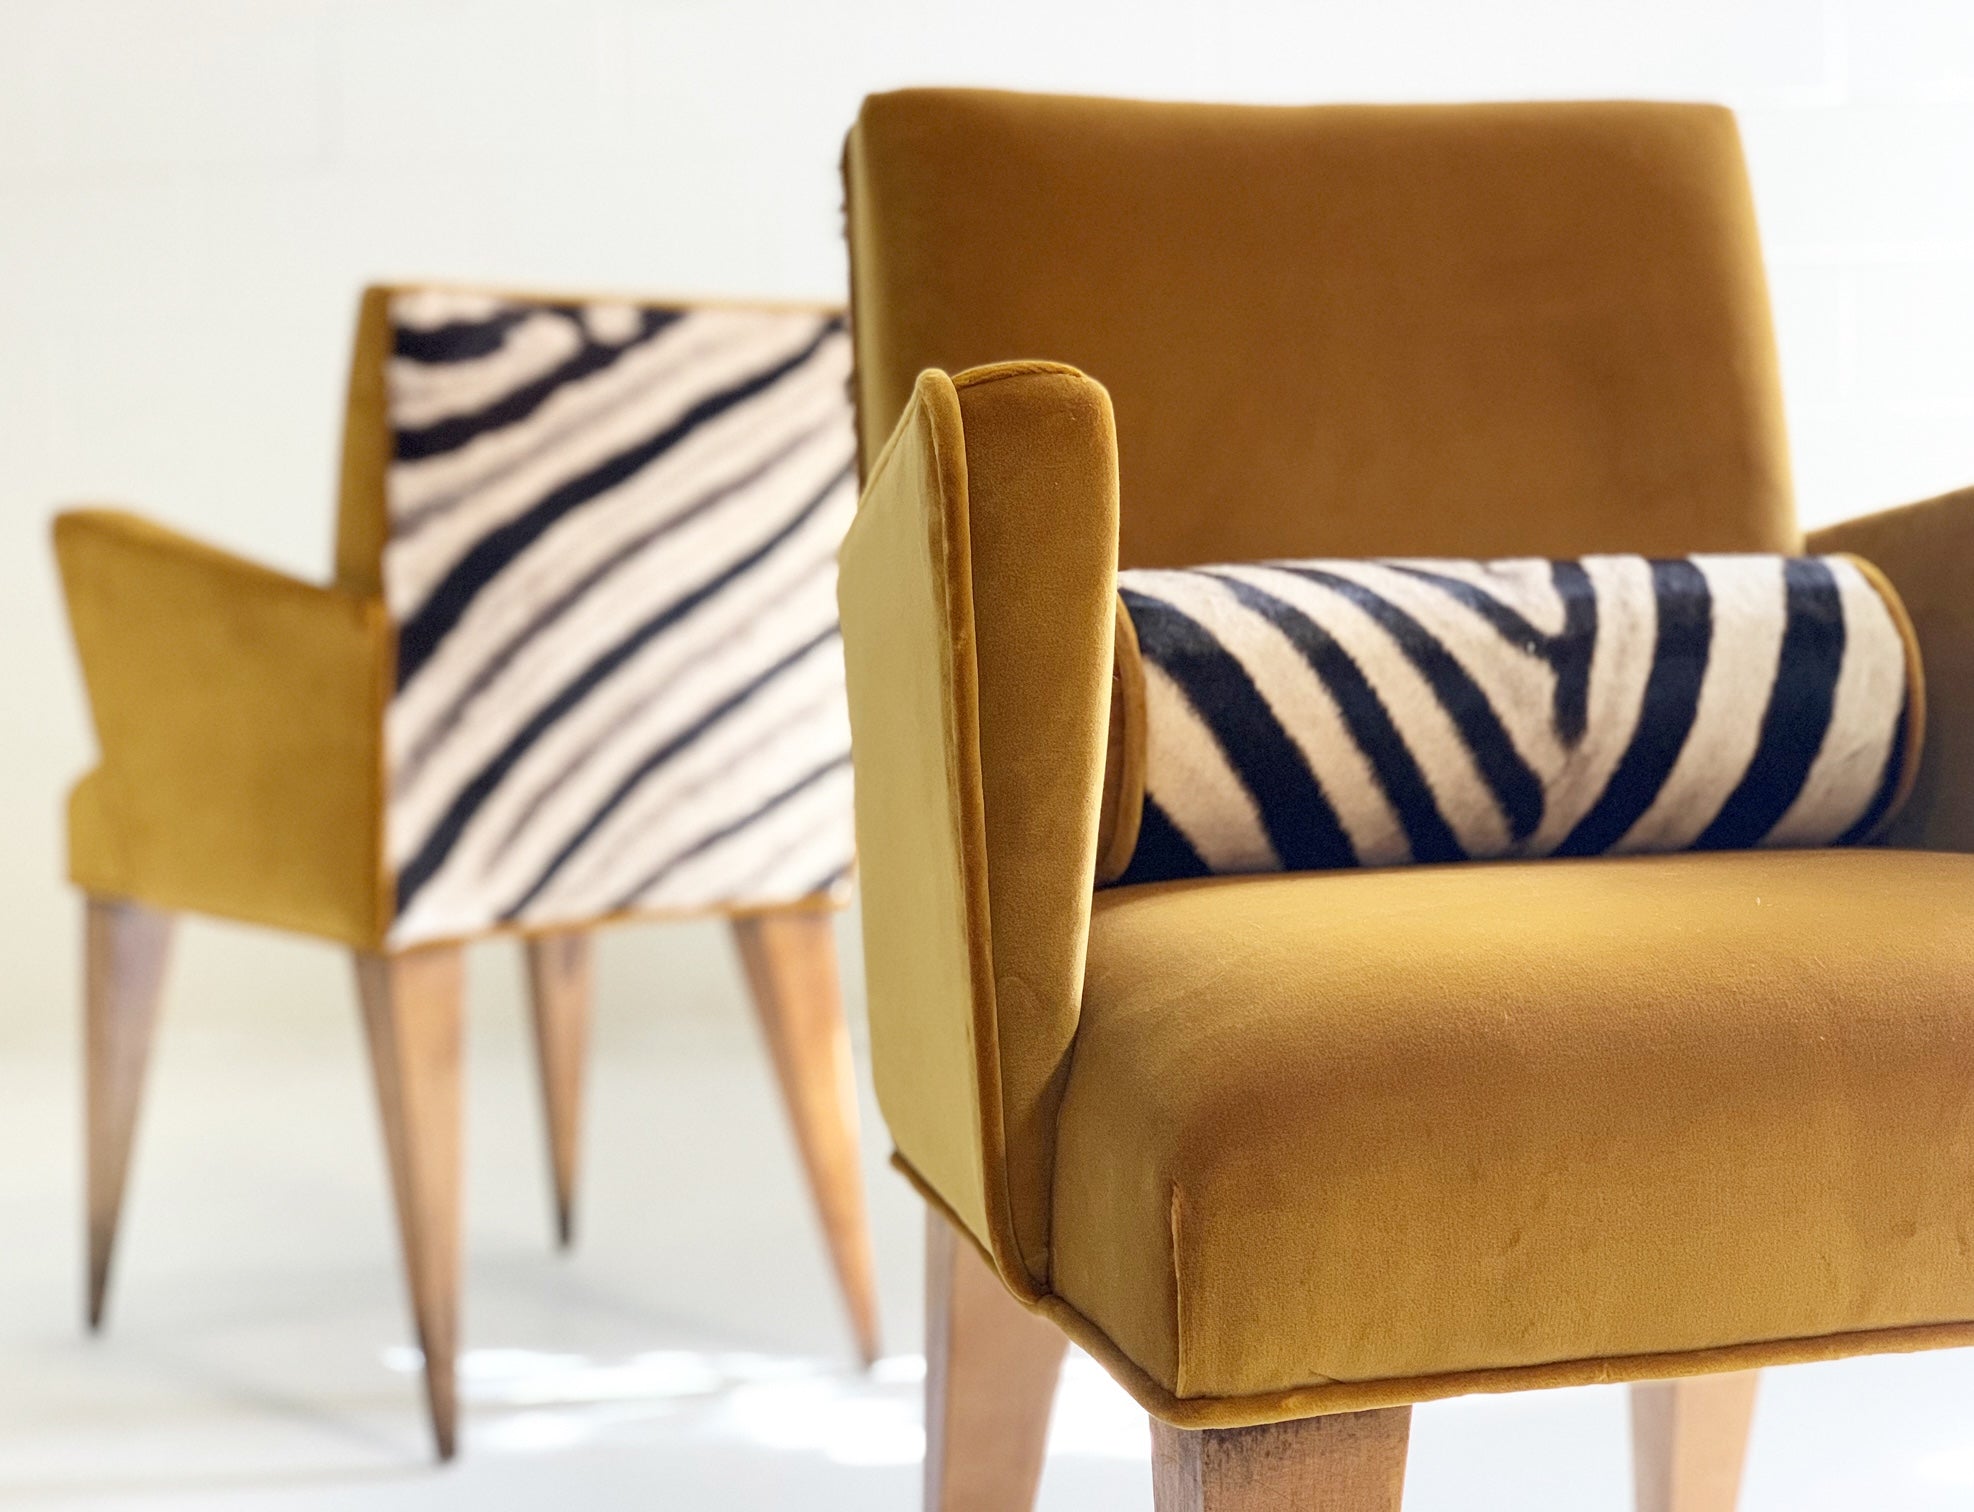 Mexican Modernist Chairs in Loro Piana Velvet and Zebra Hide, pair - FORSYTH